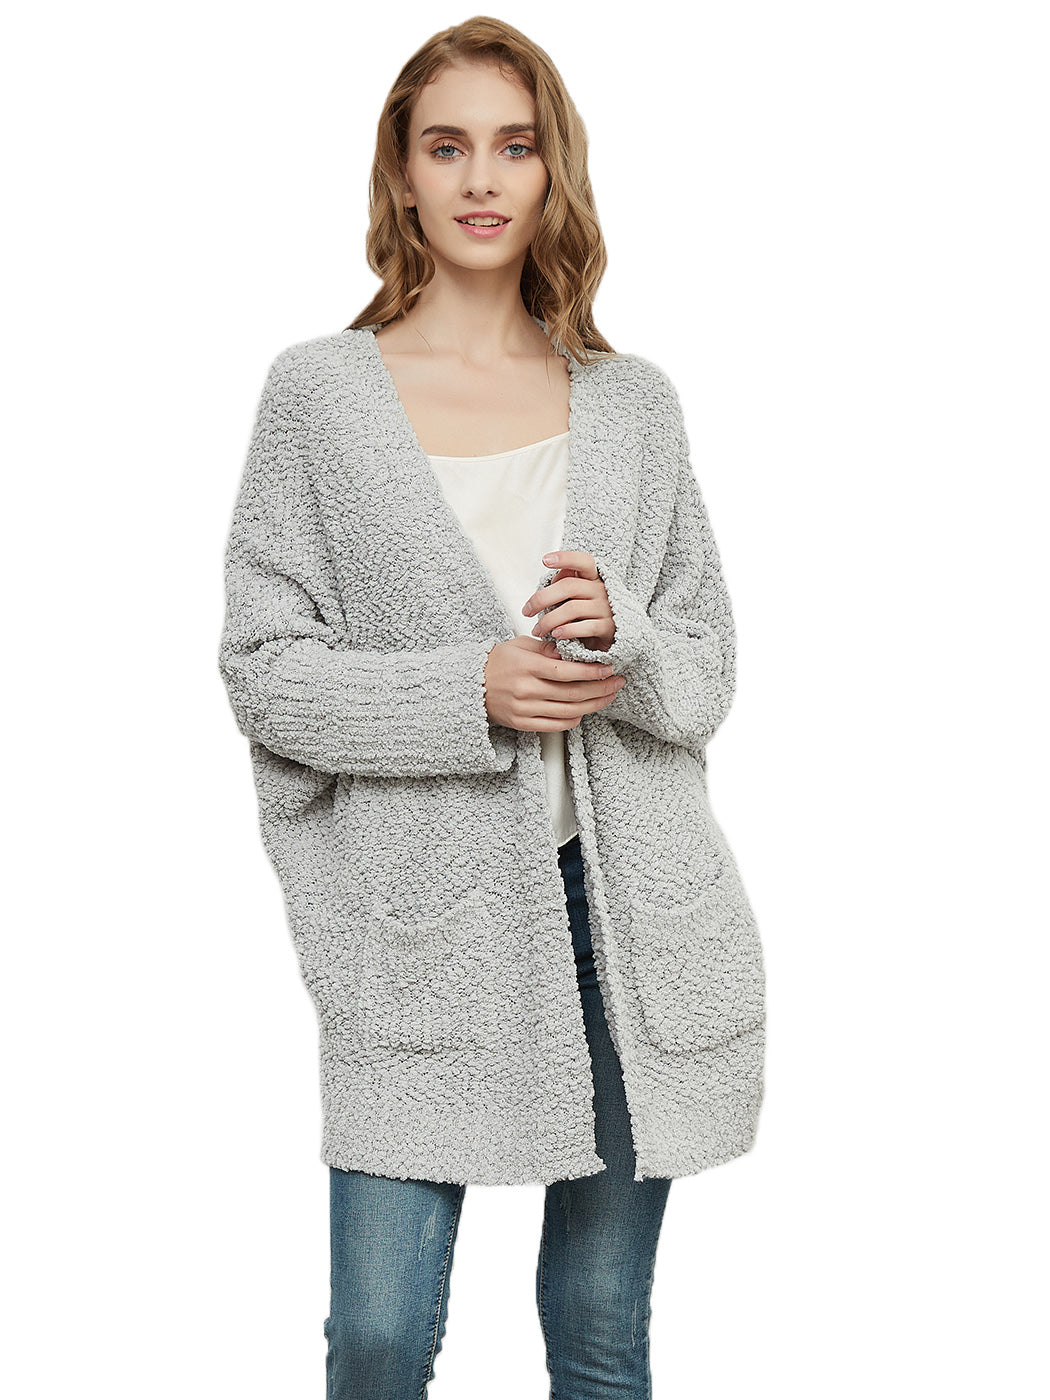 Cardigan Sweaters For Women, Dusters